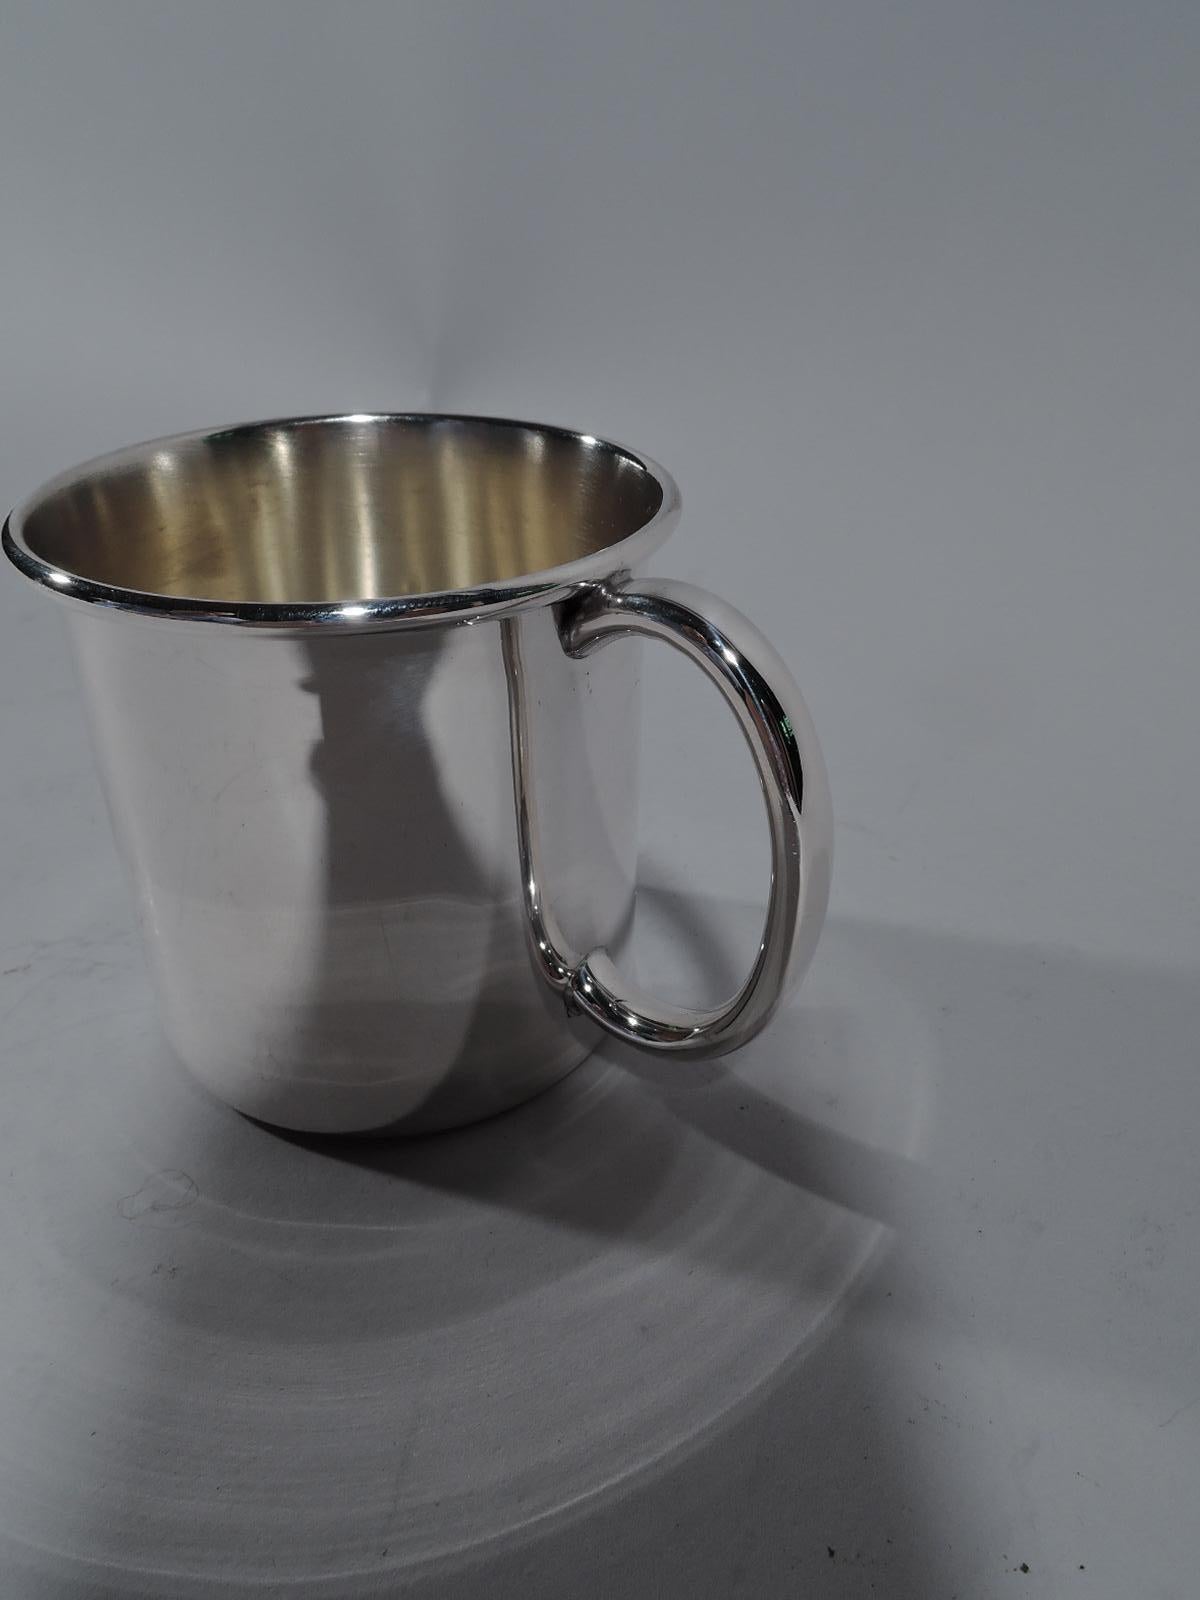 Plain and simple sterling silver baby cup. Made by Reed & Barton in Taunton, mass. Straight sides, C-scroll handle, and molded rim. The basic model that awaits engraving. Fully marked and numbered x 171. Weight: 2 troy ounces.